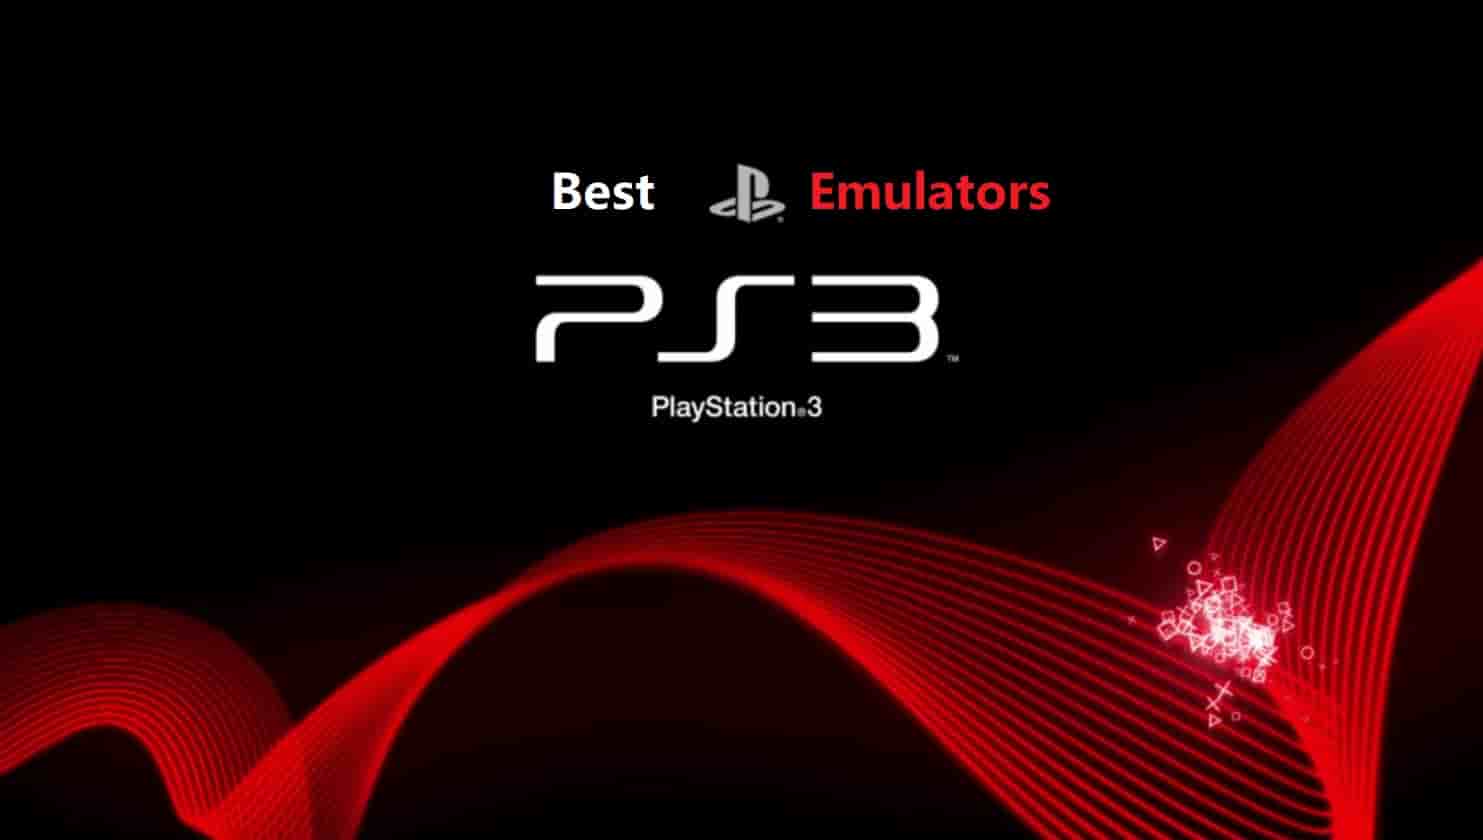 6 Best PS3 Emulators for Windows PC and Android in 2022 